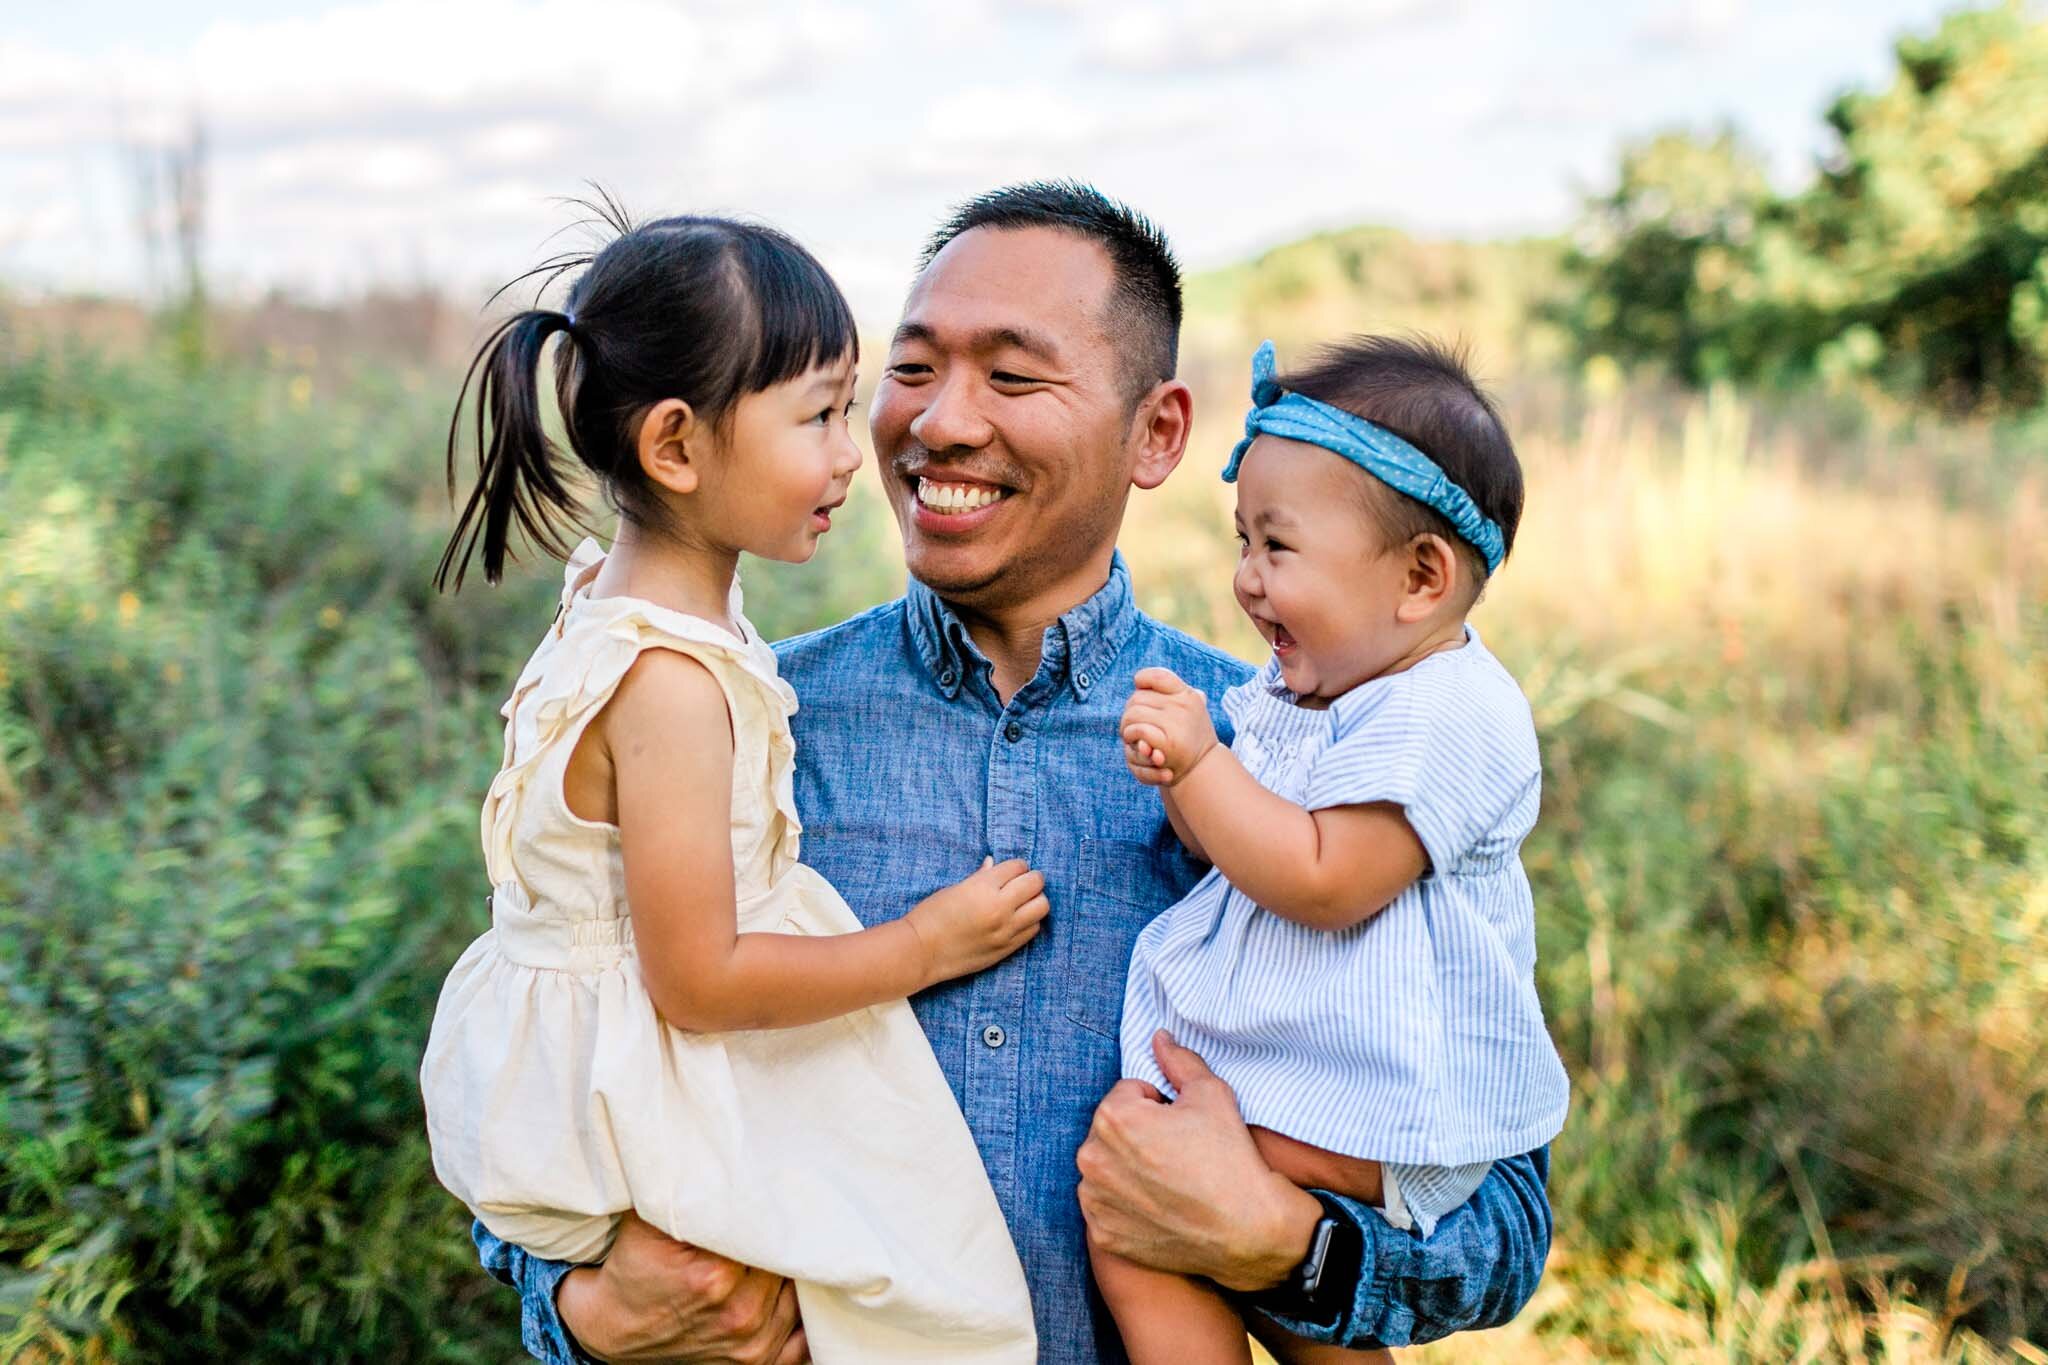 Raleigh Family Photographer | By G. Lin Photography | Father laughing with daughters standing in open field